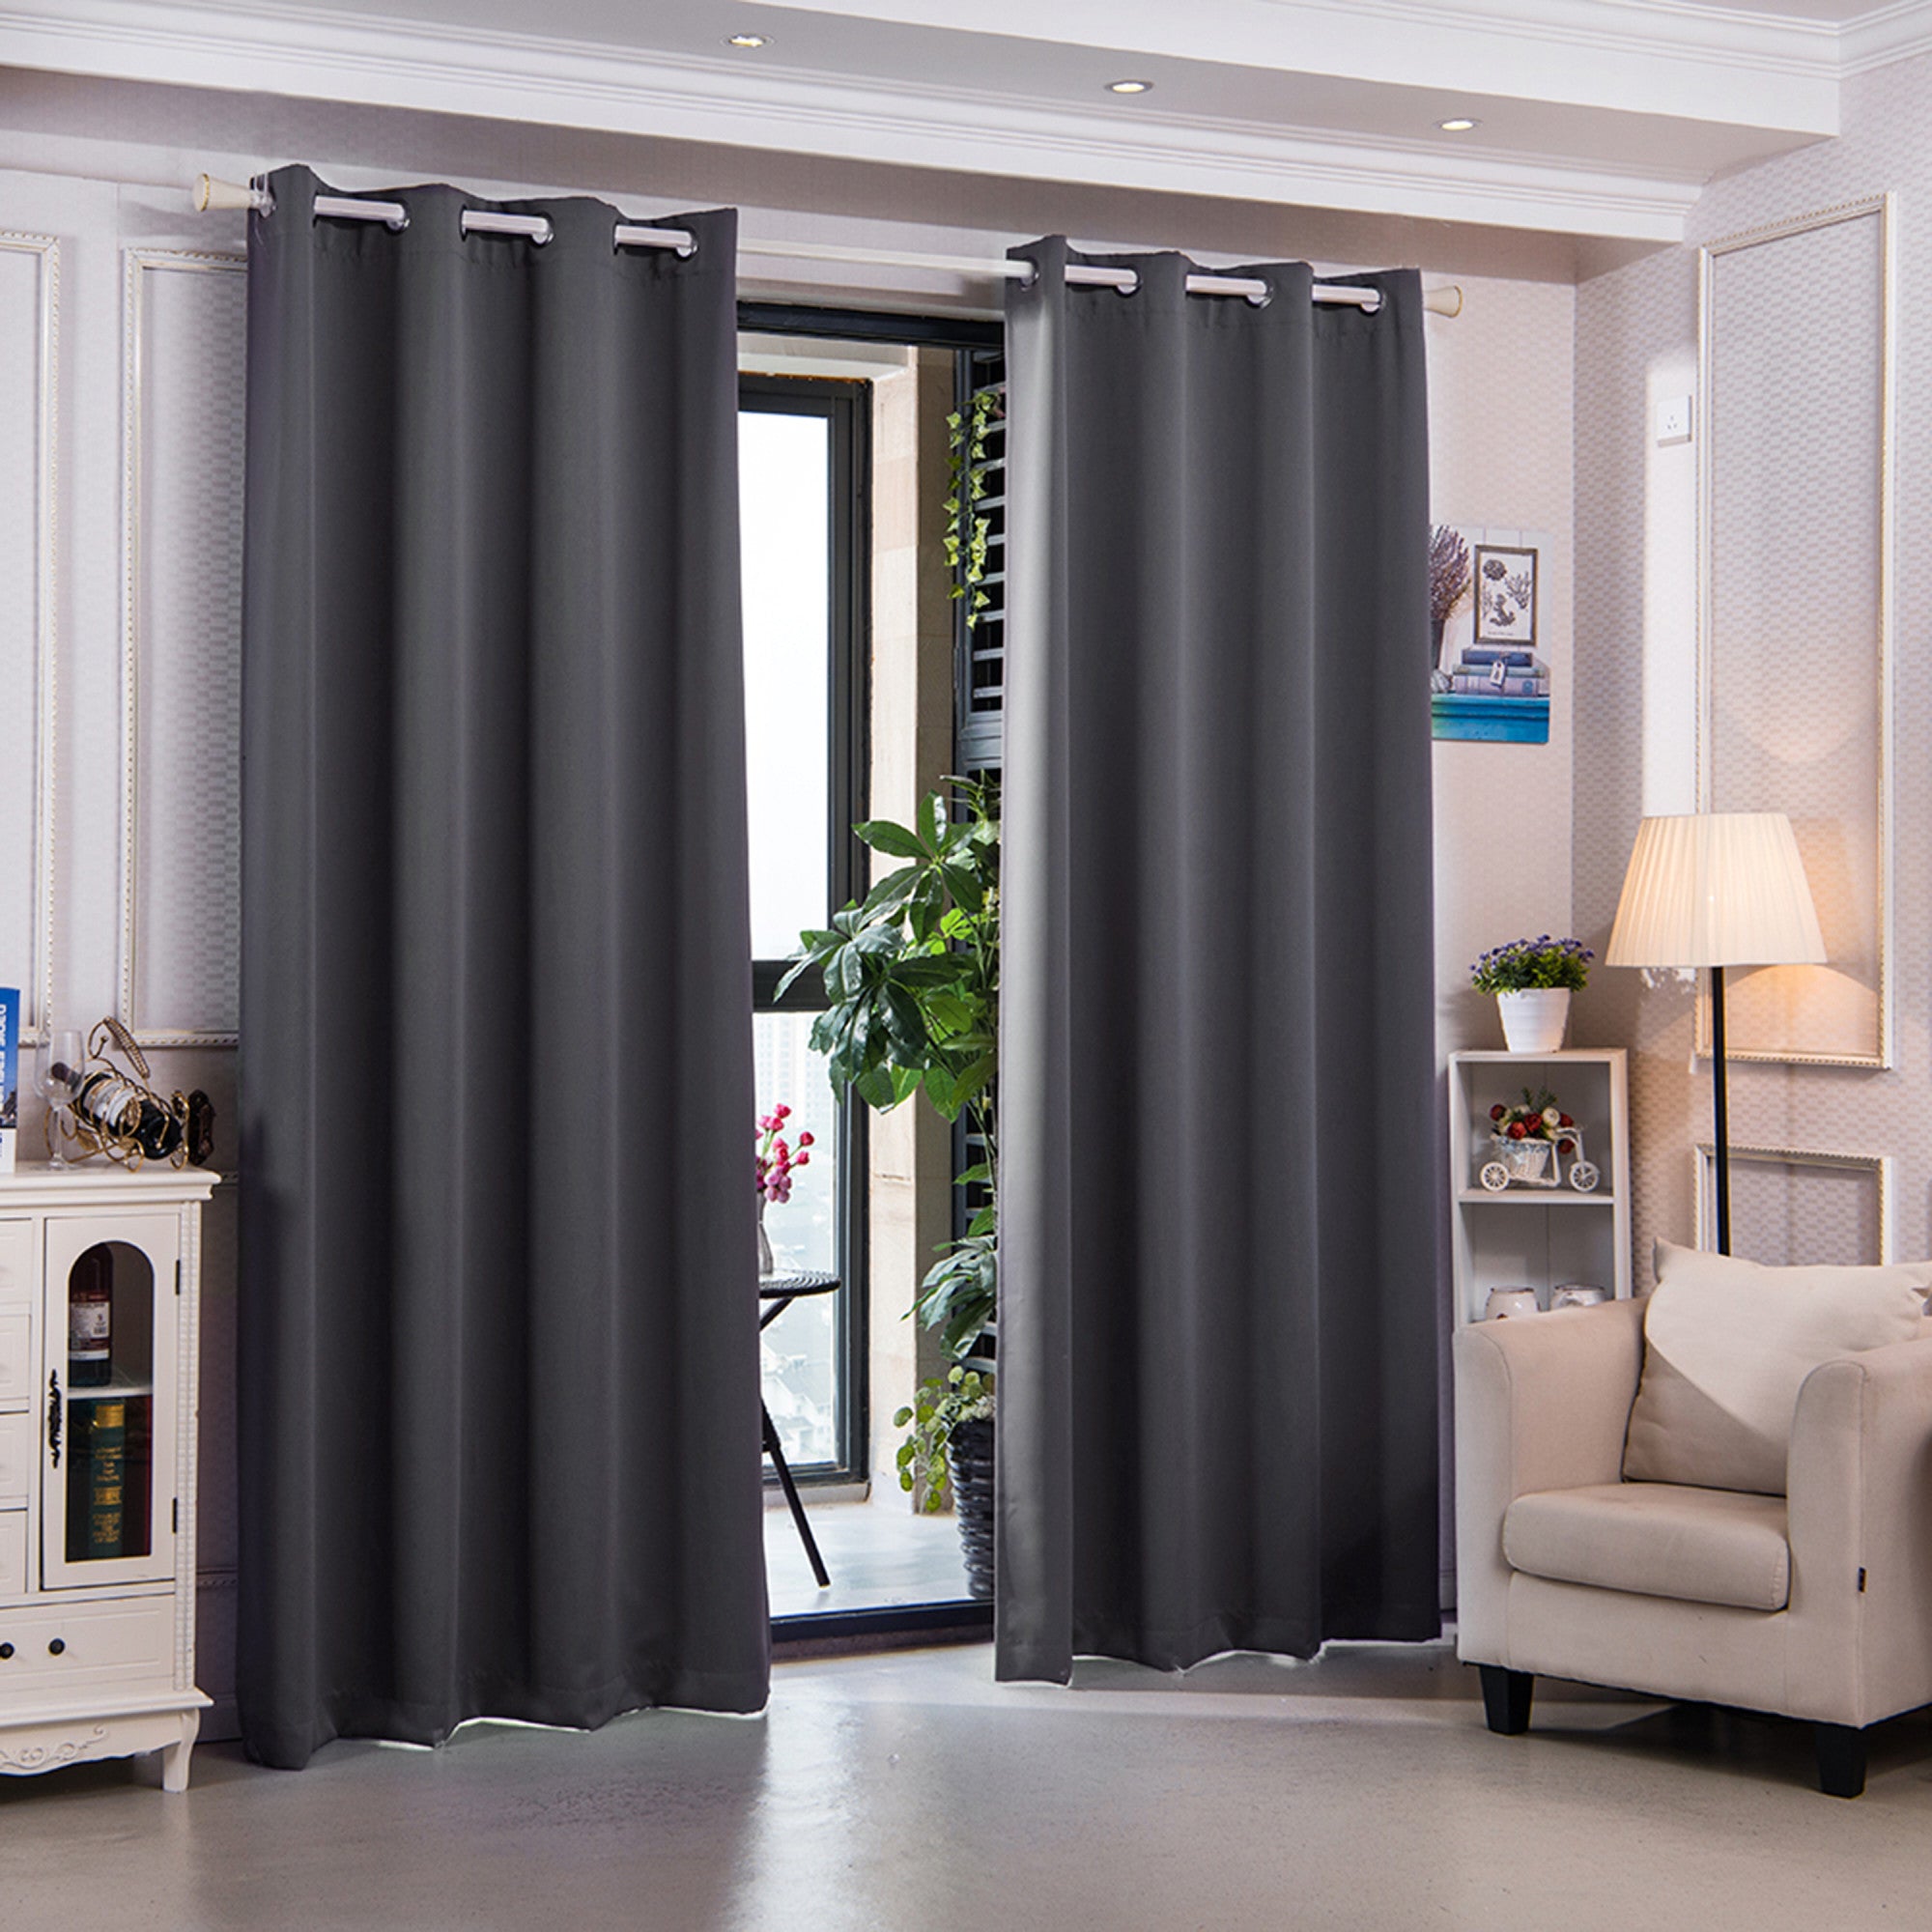 Teamson Home 63" Sparta Insulated Thermal Blackout Window Curtain Panels with Grommets, Dove Gray